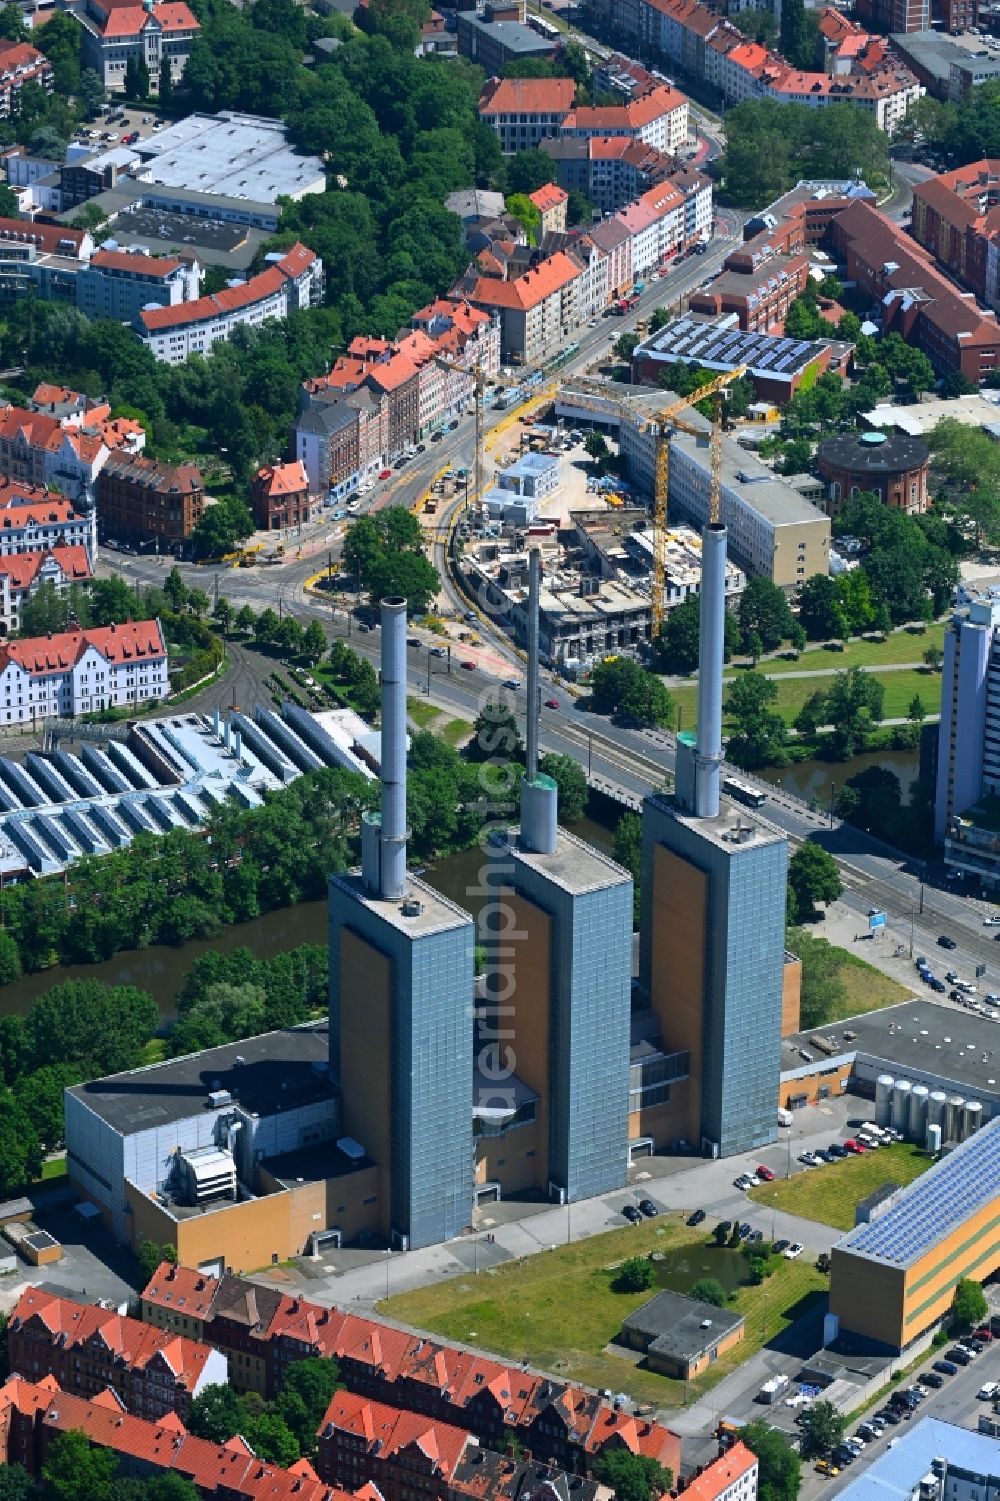 Aerial image Hannover - Power station plants of the combined heat and power station - regional heat Heizkraftwerk Linden on Spinnereistrasse in Hannover in the state Lower Saxony, Germany